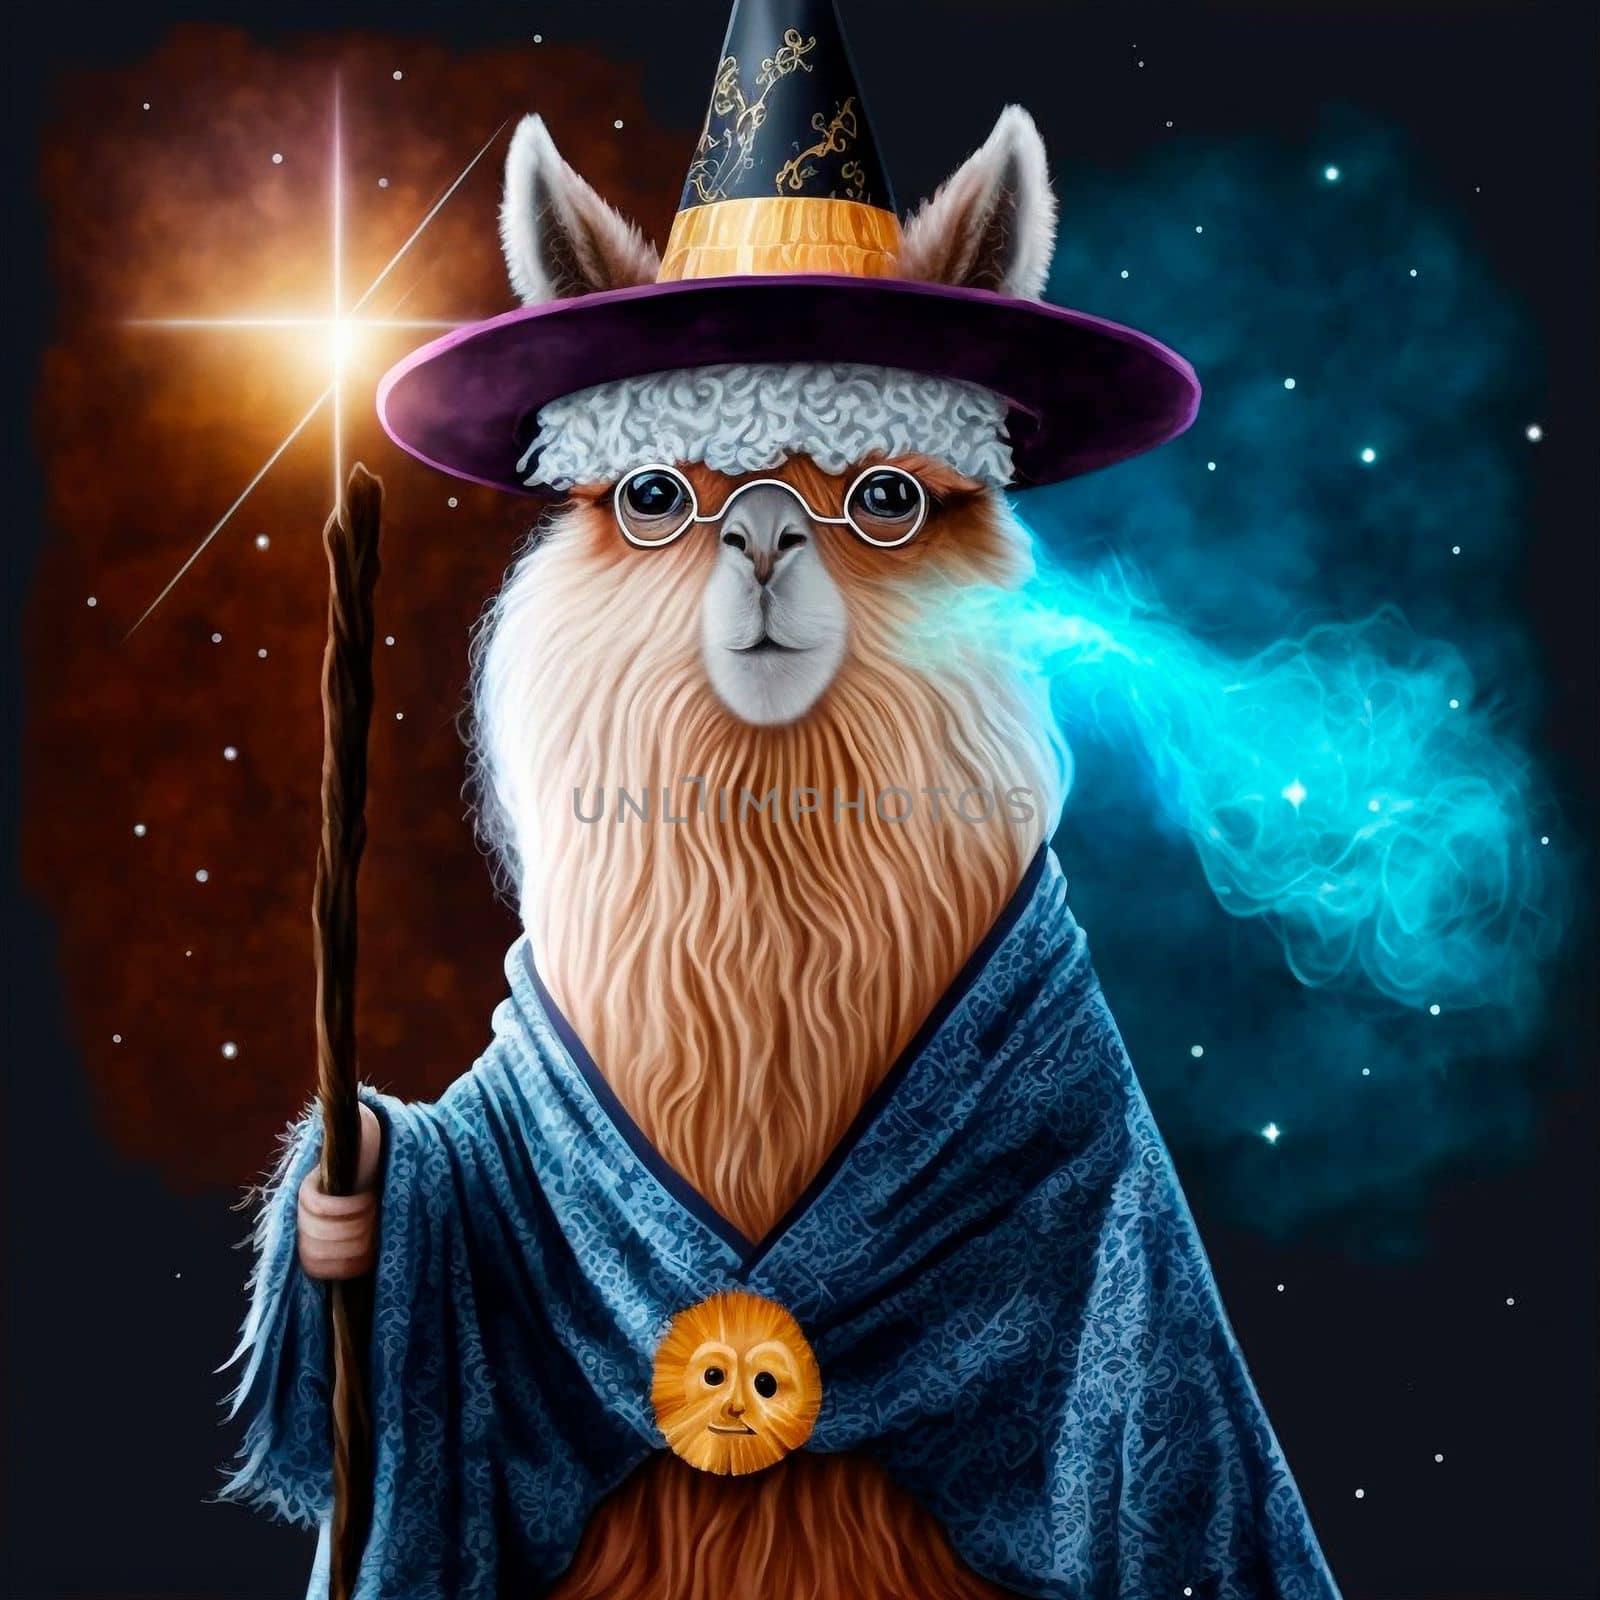 Alpaca wizard , magician with a wand. High quality illustration